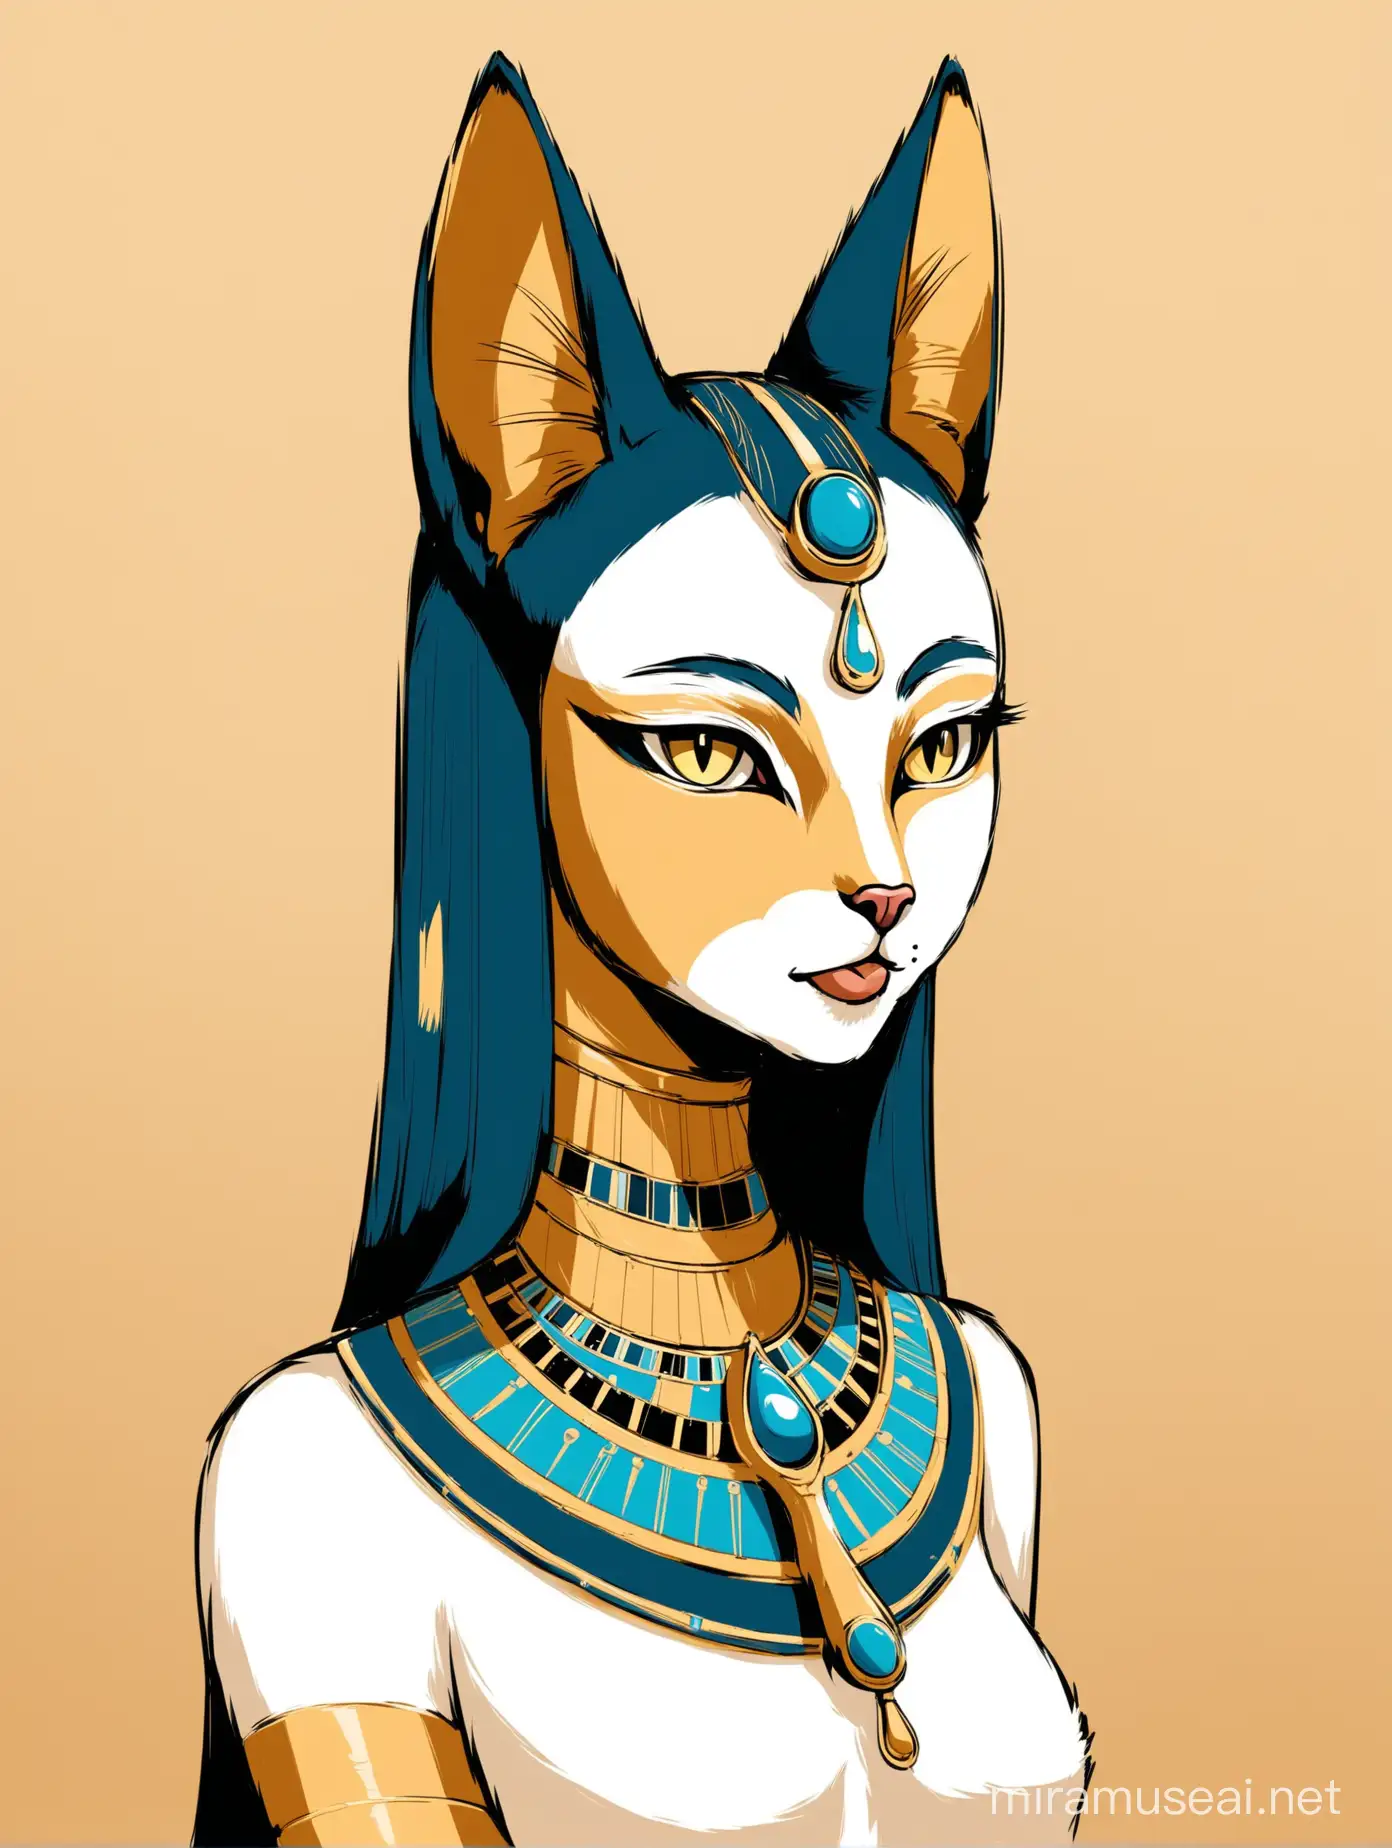 Minimalist Portrait of Egyptian Goddess Bastet Influenced by Picasso and Salvador Dali